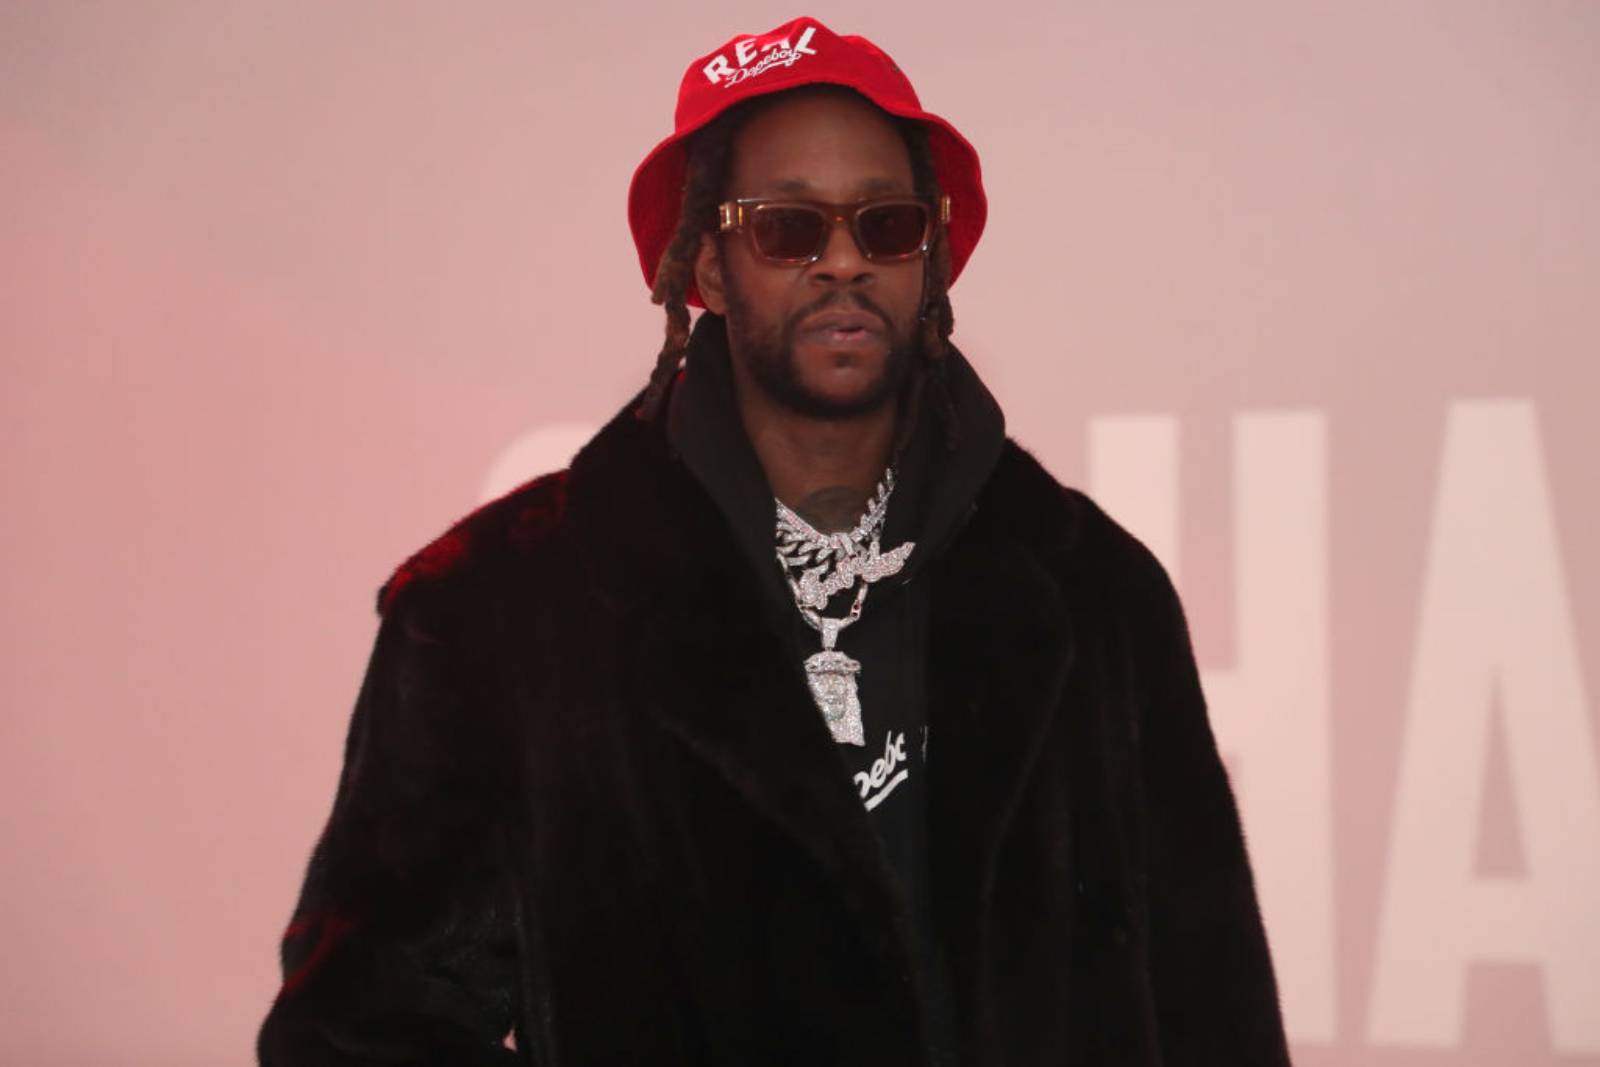 2 Chainz attends his "Dope Don't Sell Itself" listening party on February 02, 2022 in New York City. (Photo by Johnny Nunez/WireImage)